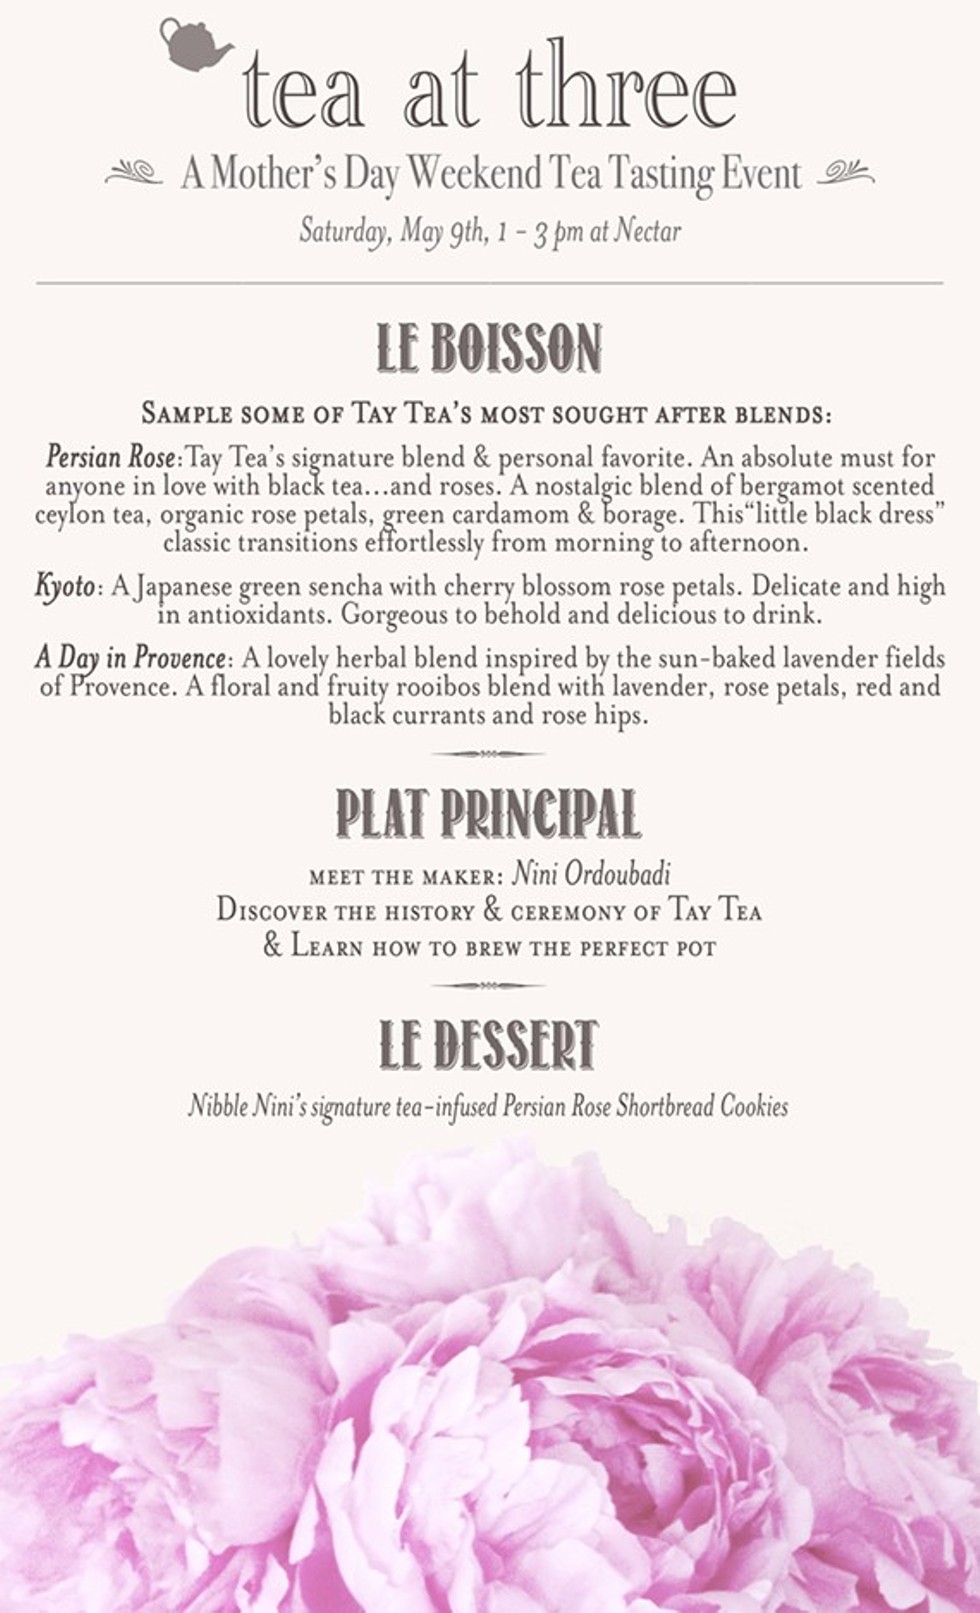 A Mother's Day Weekend Tea Tasting Event at Nectar